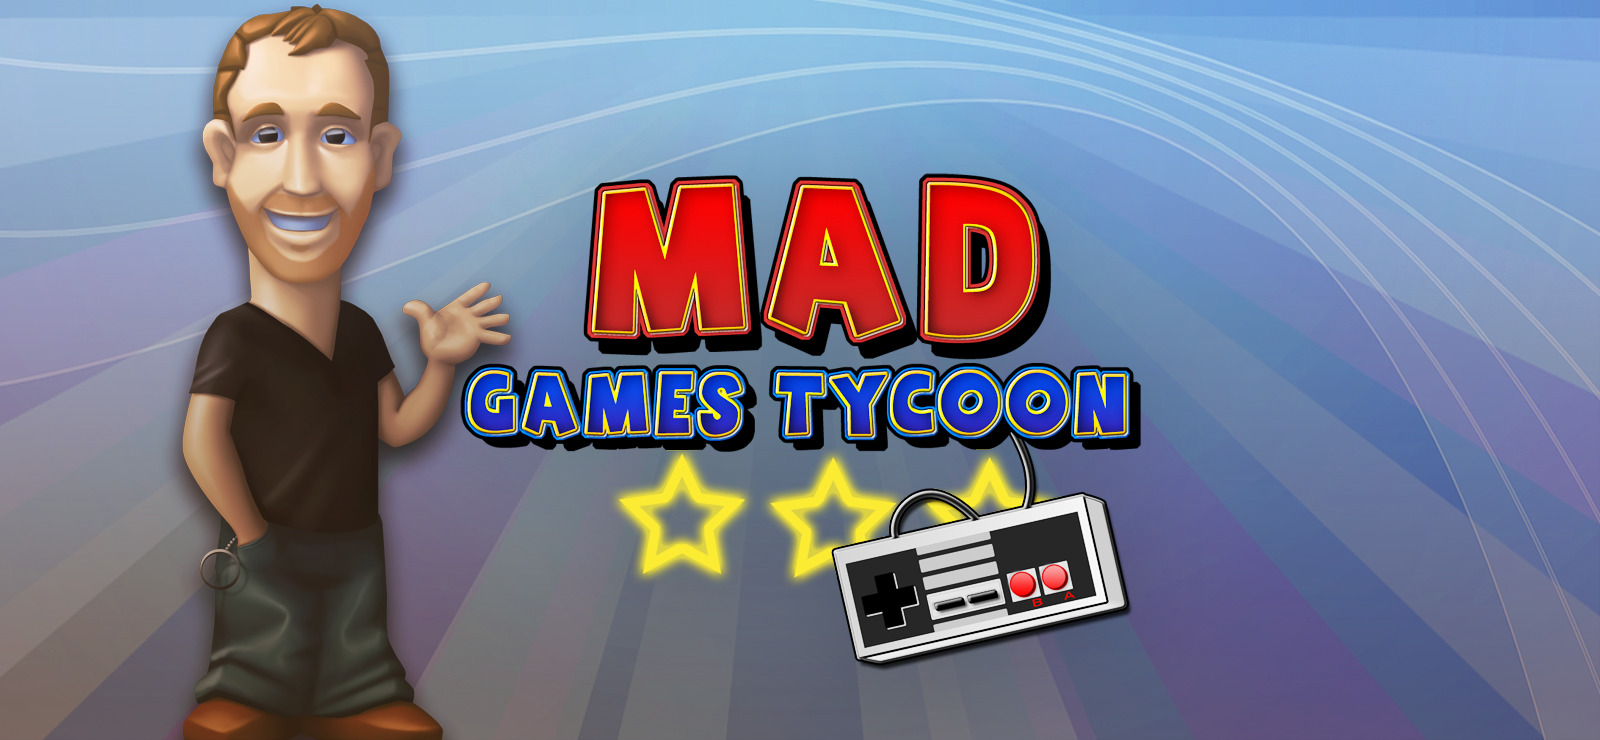 Игра mad games tycoon. Mad games Tycoon. Mad games Tycoon 1. Mad games Tycoon 3. Mad games Tycoon 2.